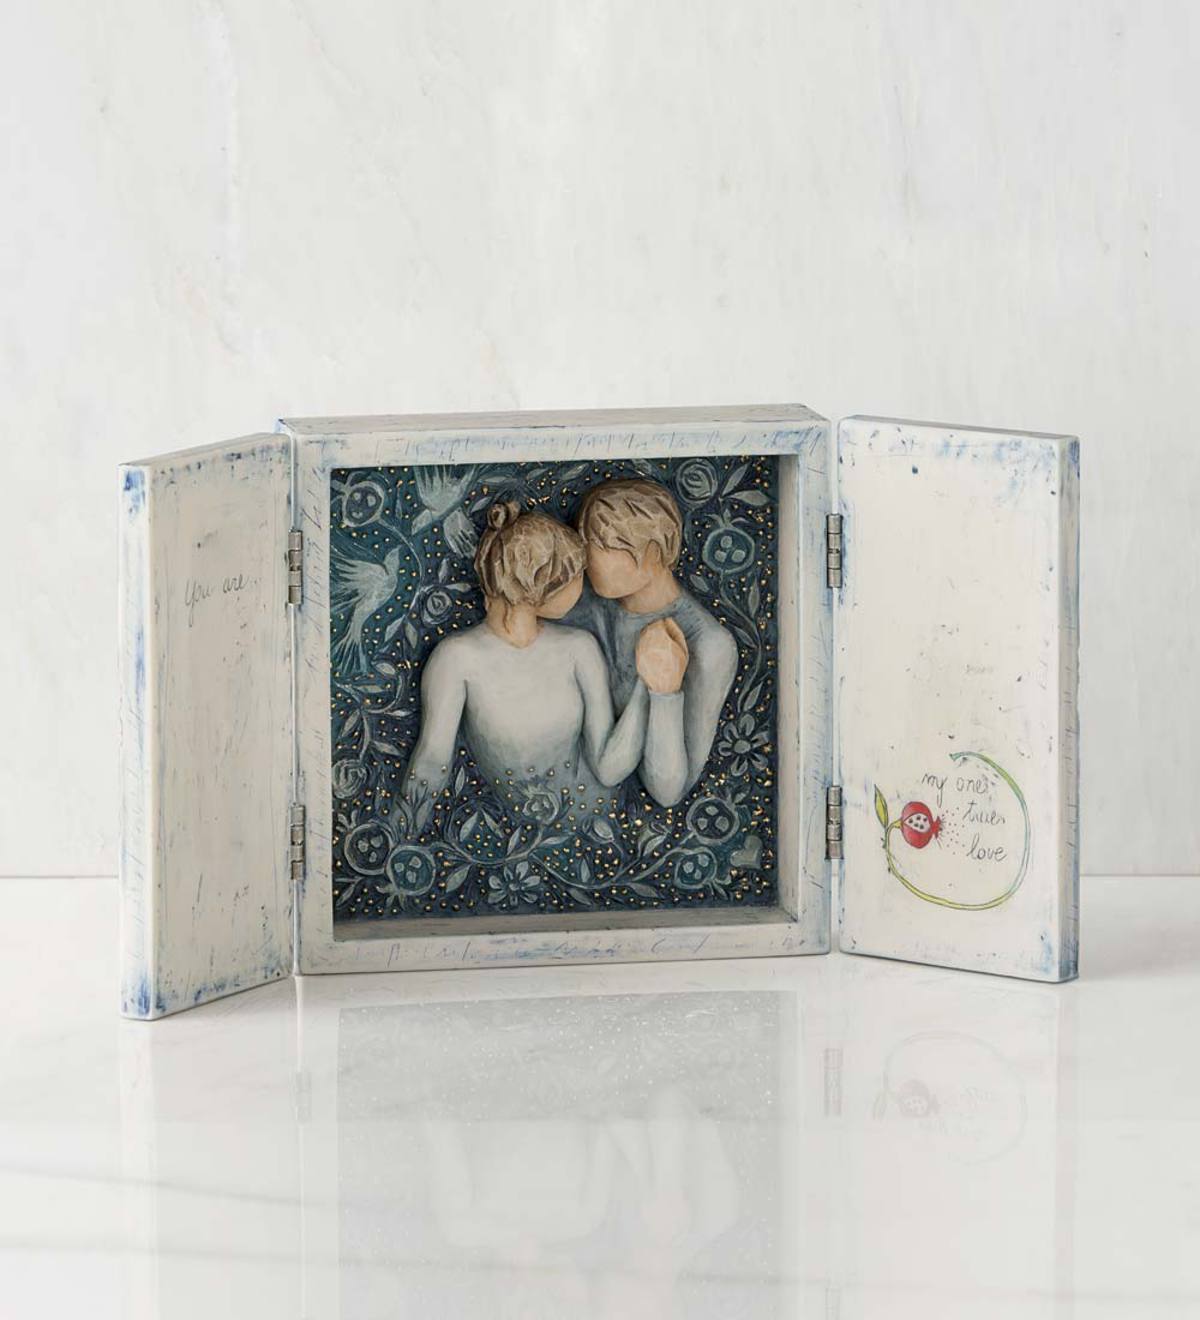 Willow Tree® Duet Triptych Hinged Box